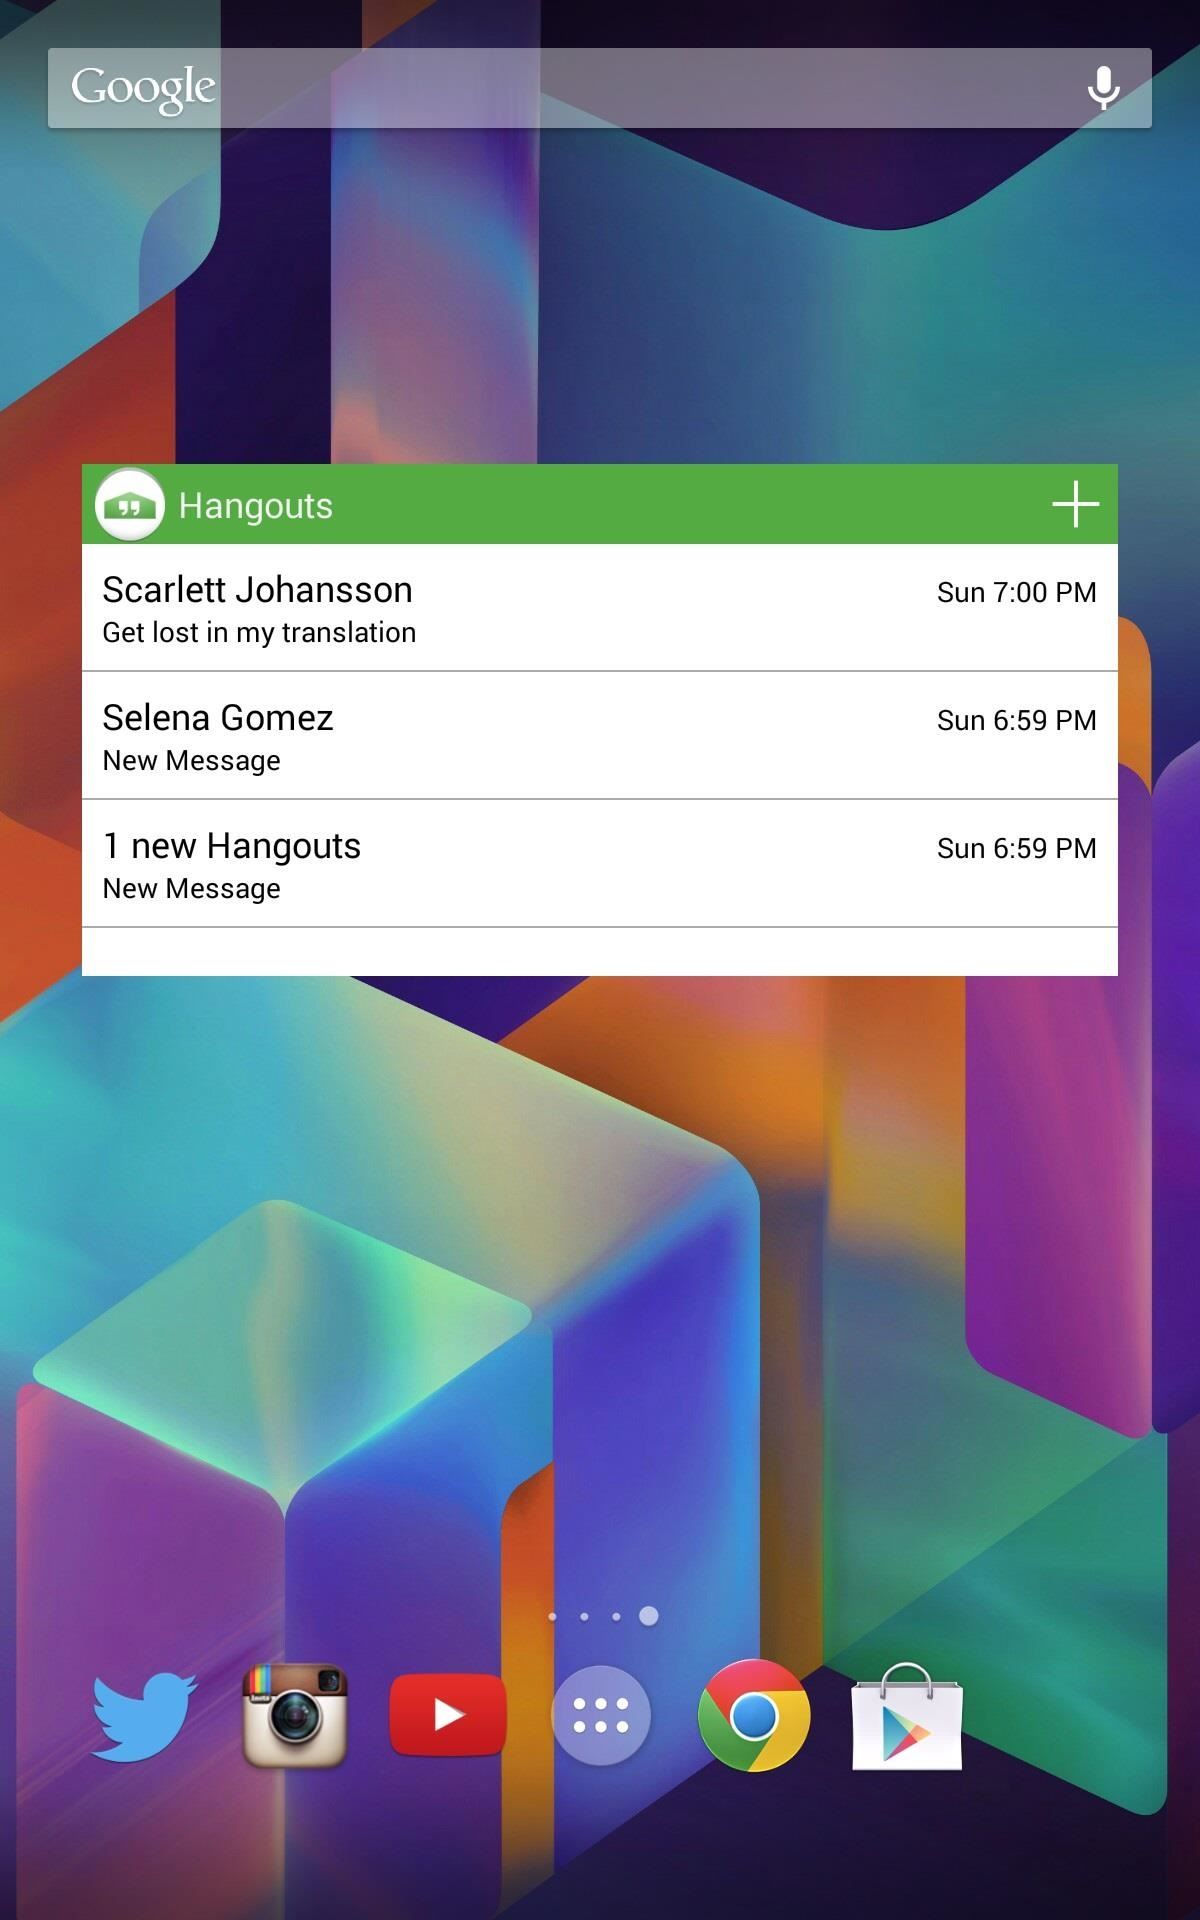 How to Preview New Google Hangout Messages Right from the Home Screen on Your Nexus 7